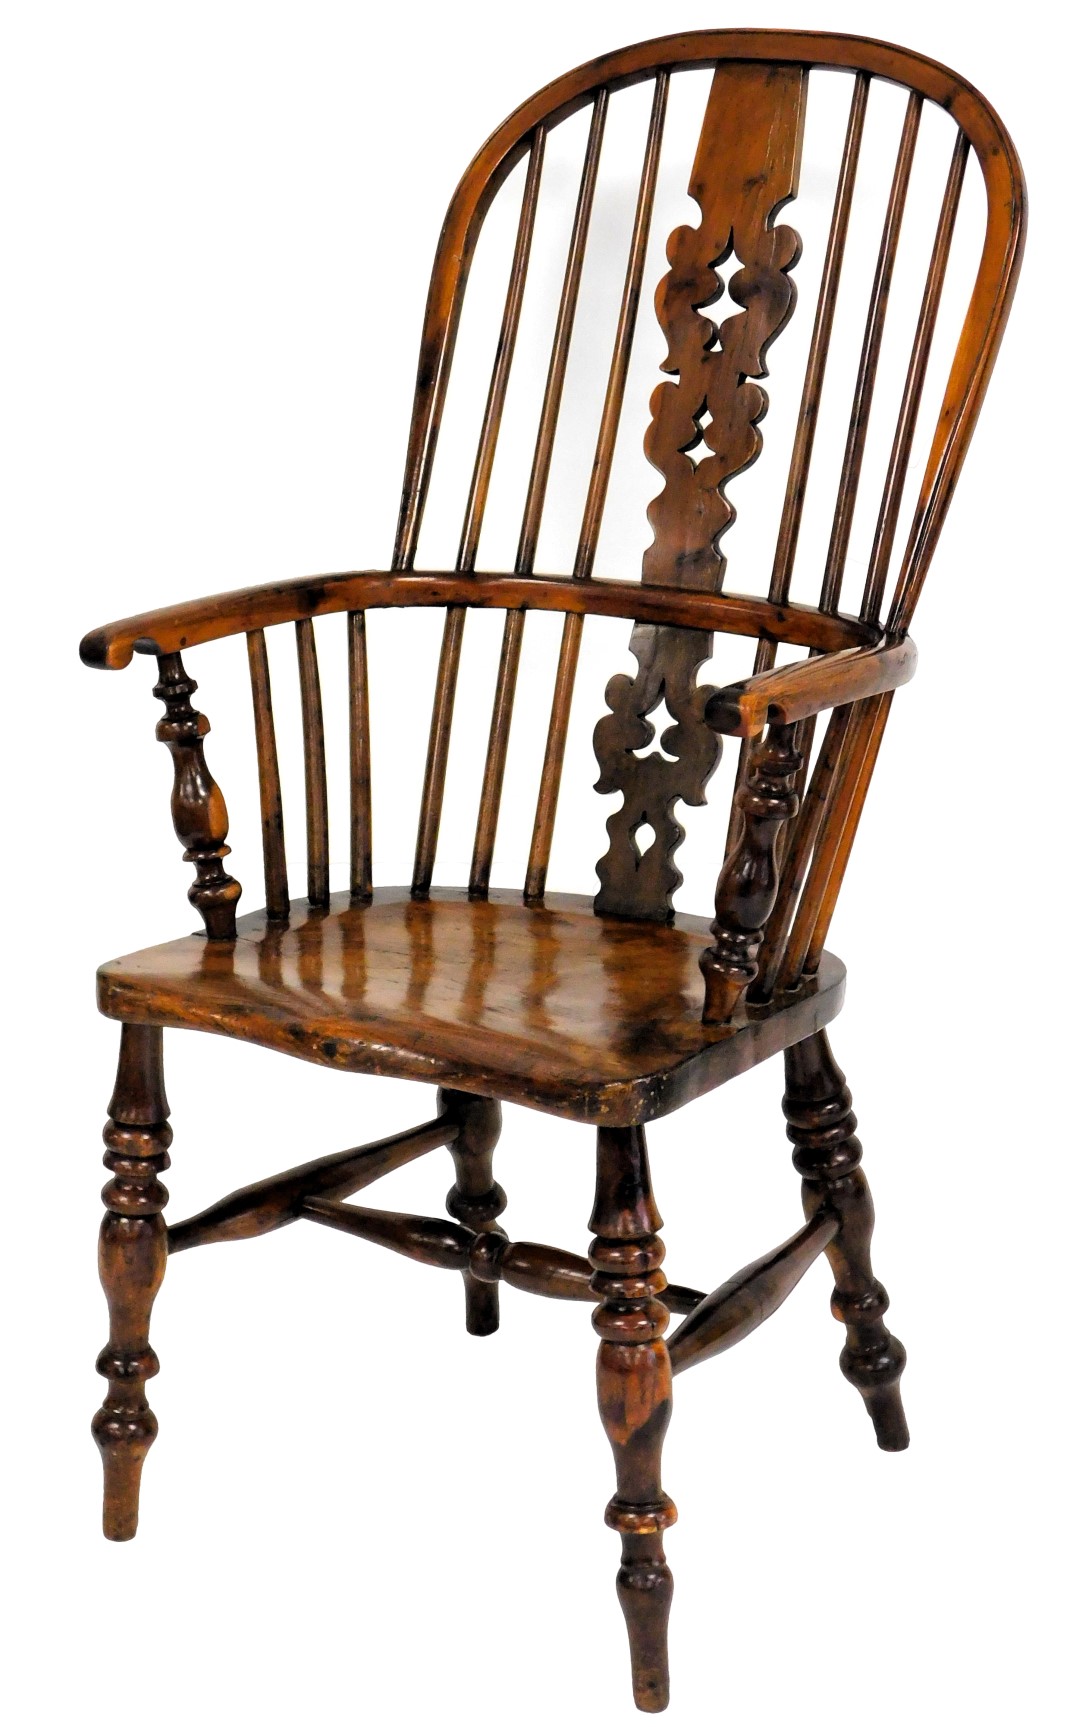 A yew and elm Windsor chair, with a pierced splat, spindle turned rails and a solid seat, on turned